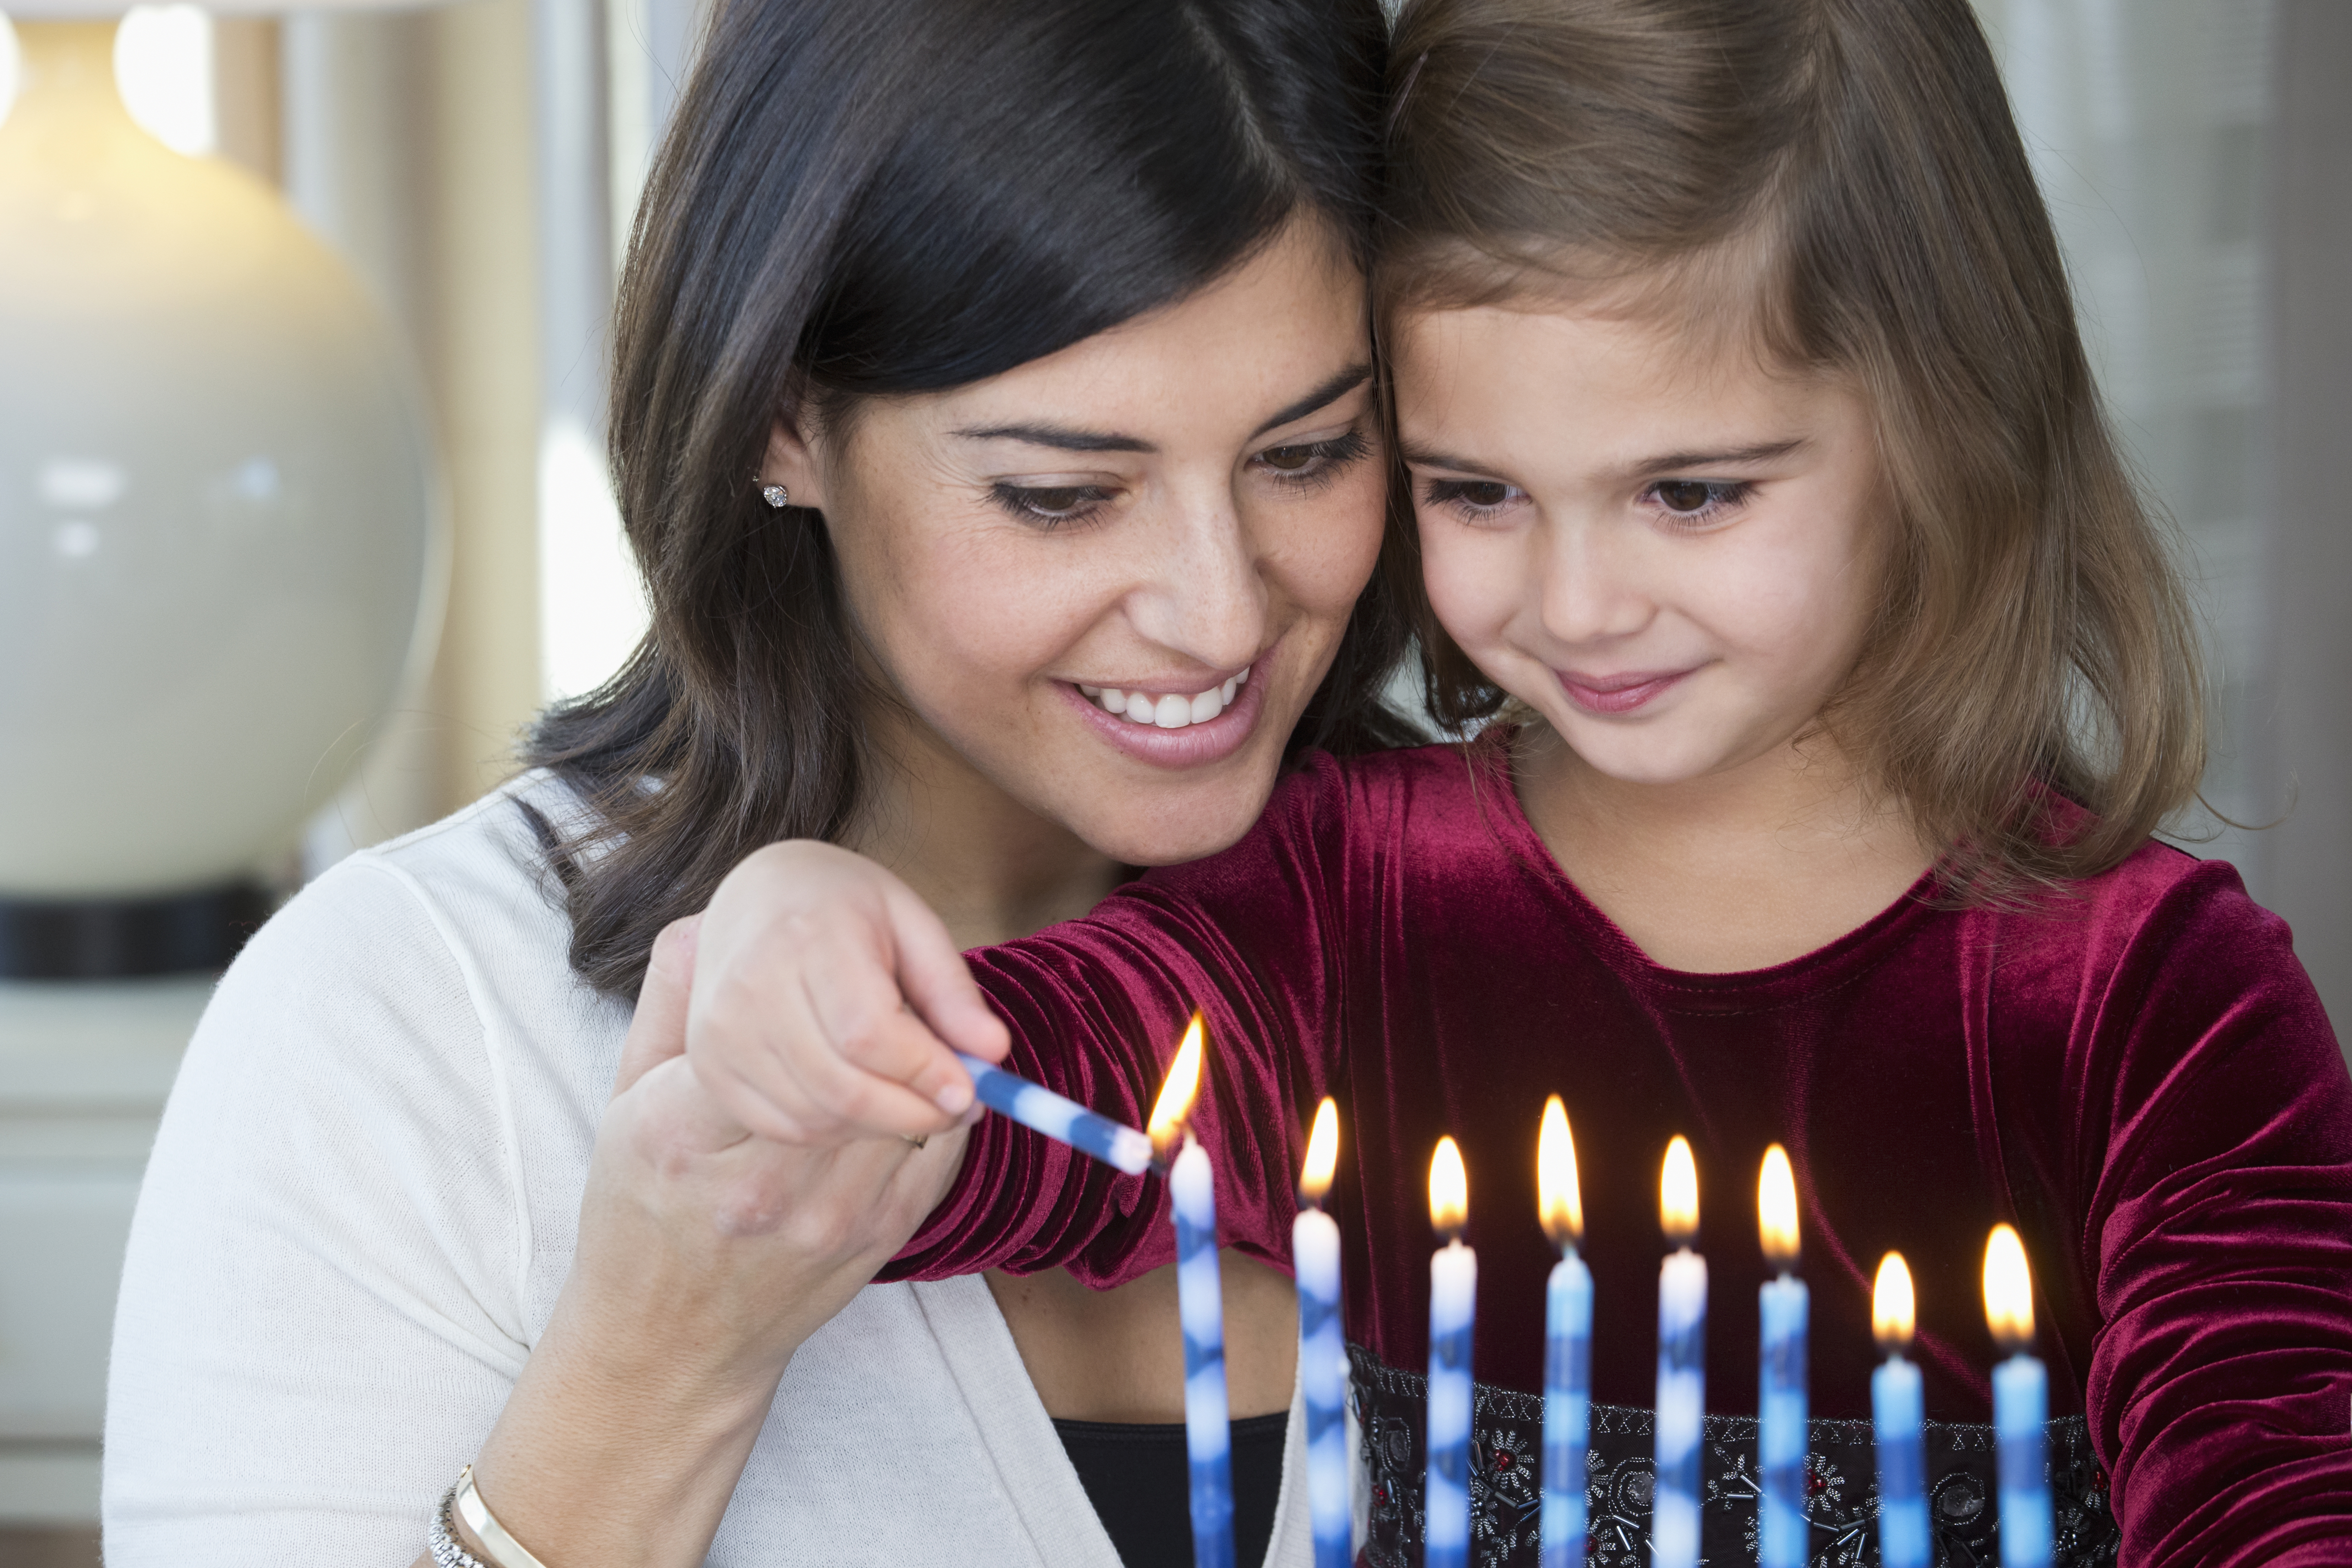 A mother and daughter lighting candles on a Hanukkah menorah. (Getty Images)